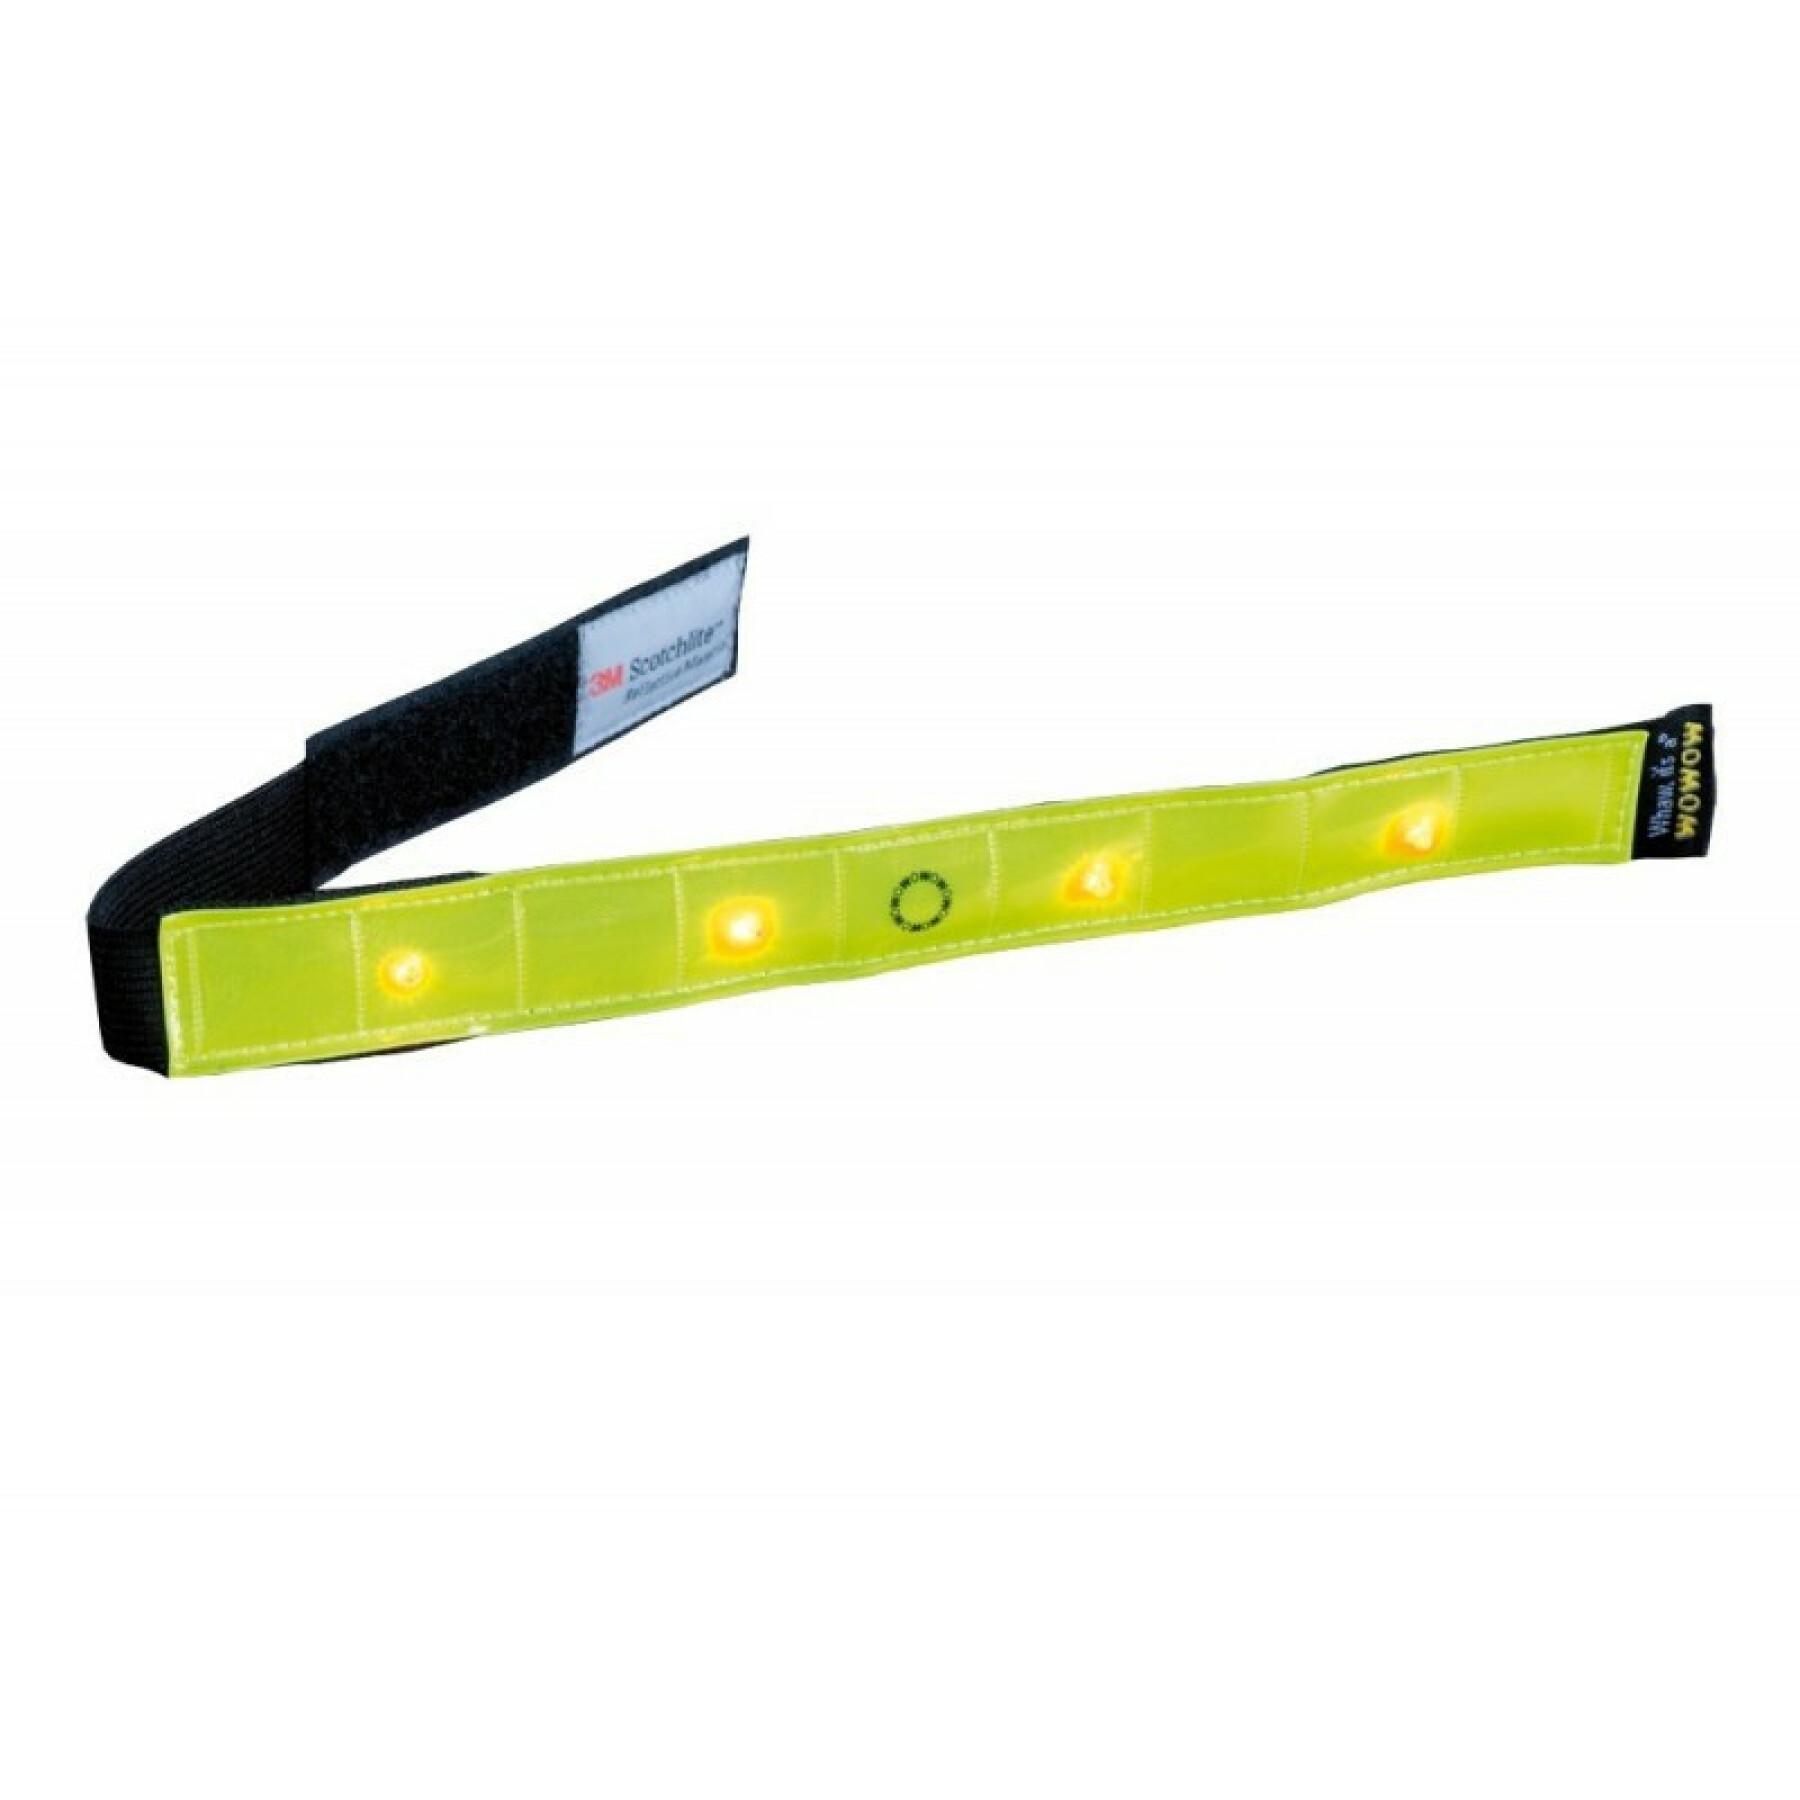 Reflecterende armband met rode LED's Wowow